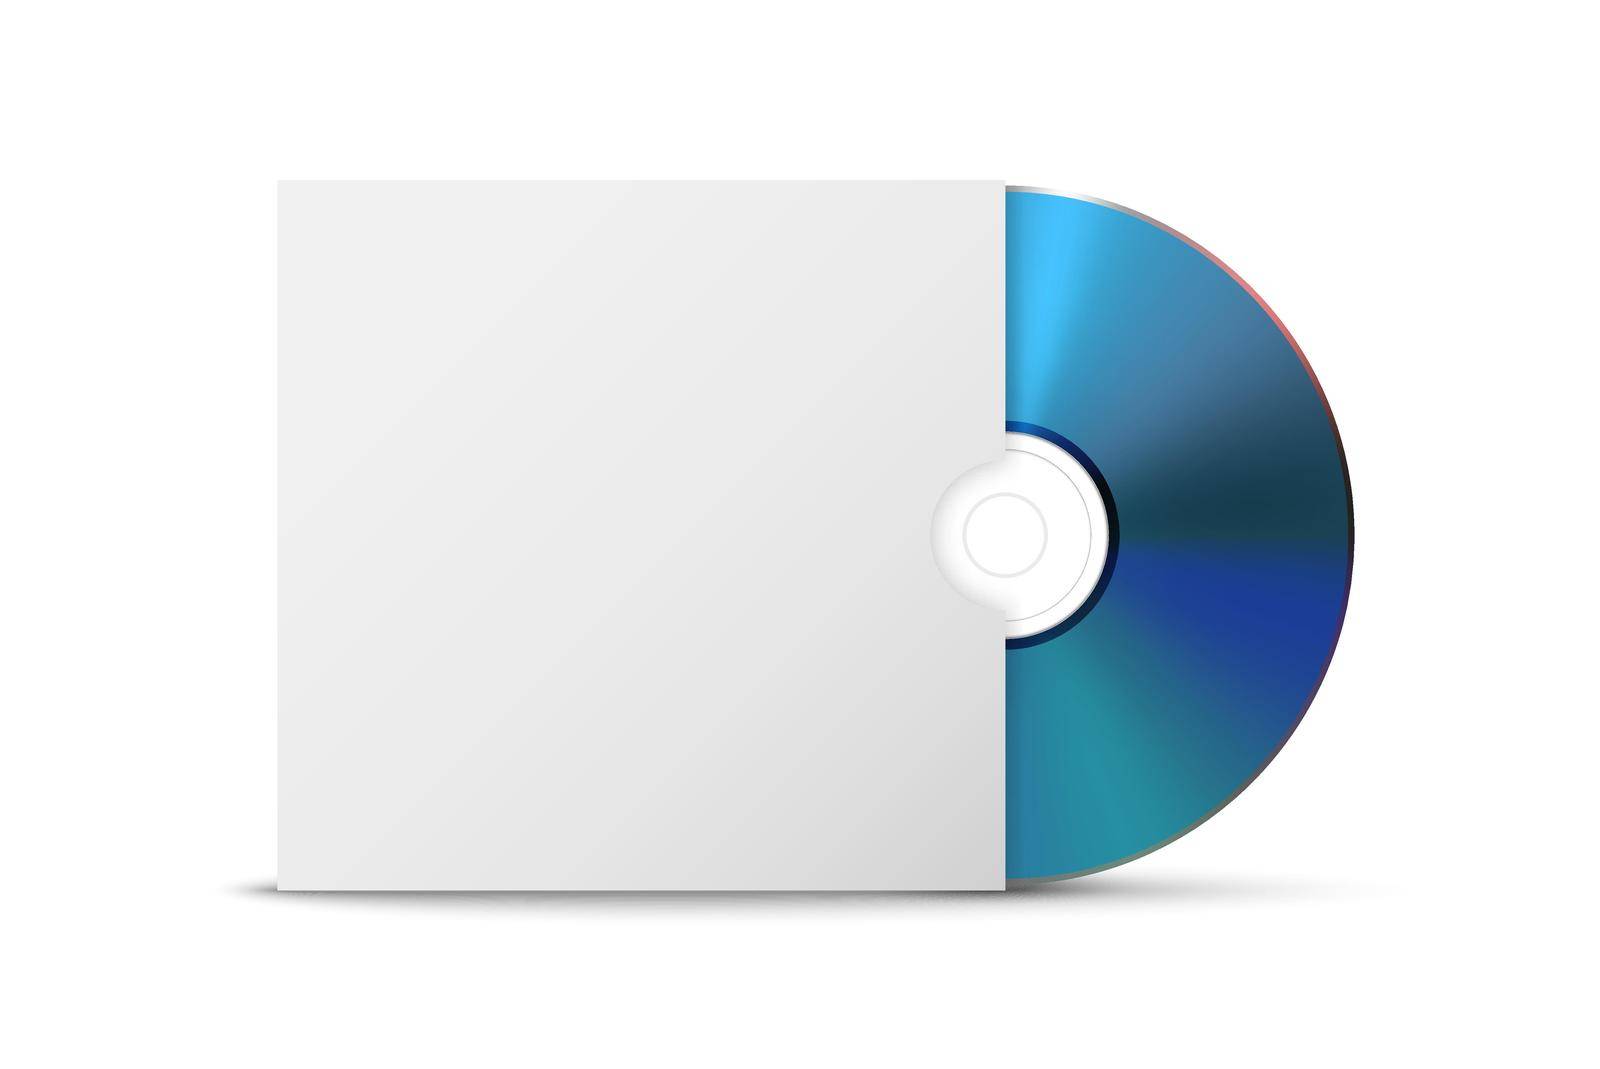 Vector 3d Realistic Blue CD, DVD with Paper Case, Envelope Isolated on White. CD Box, Packaging Design Template for Mockup. Compact Disk and Packaging Icon, Front View.